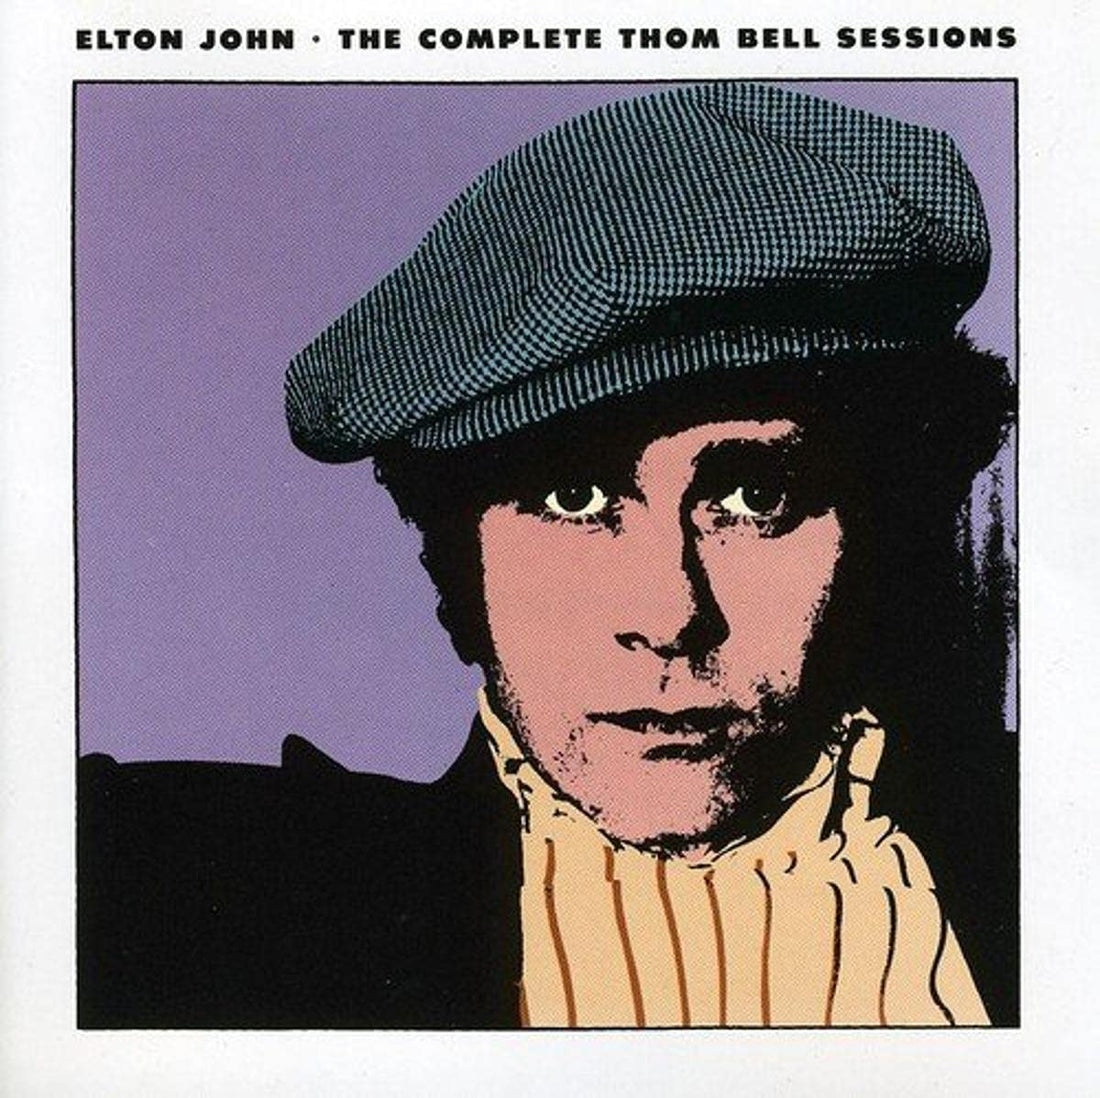 Elton John- The Complete Thom Bell Sessions